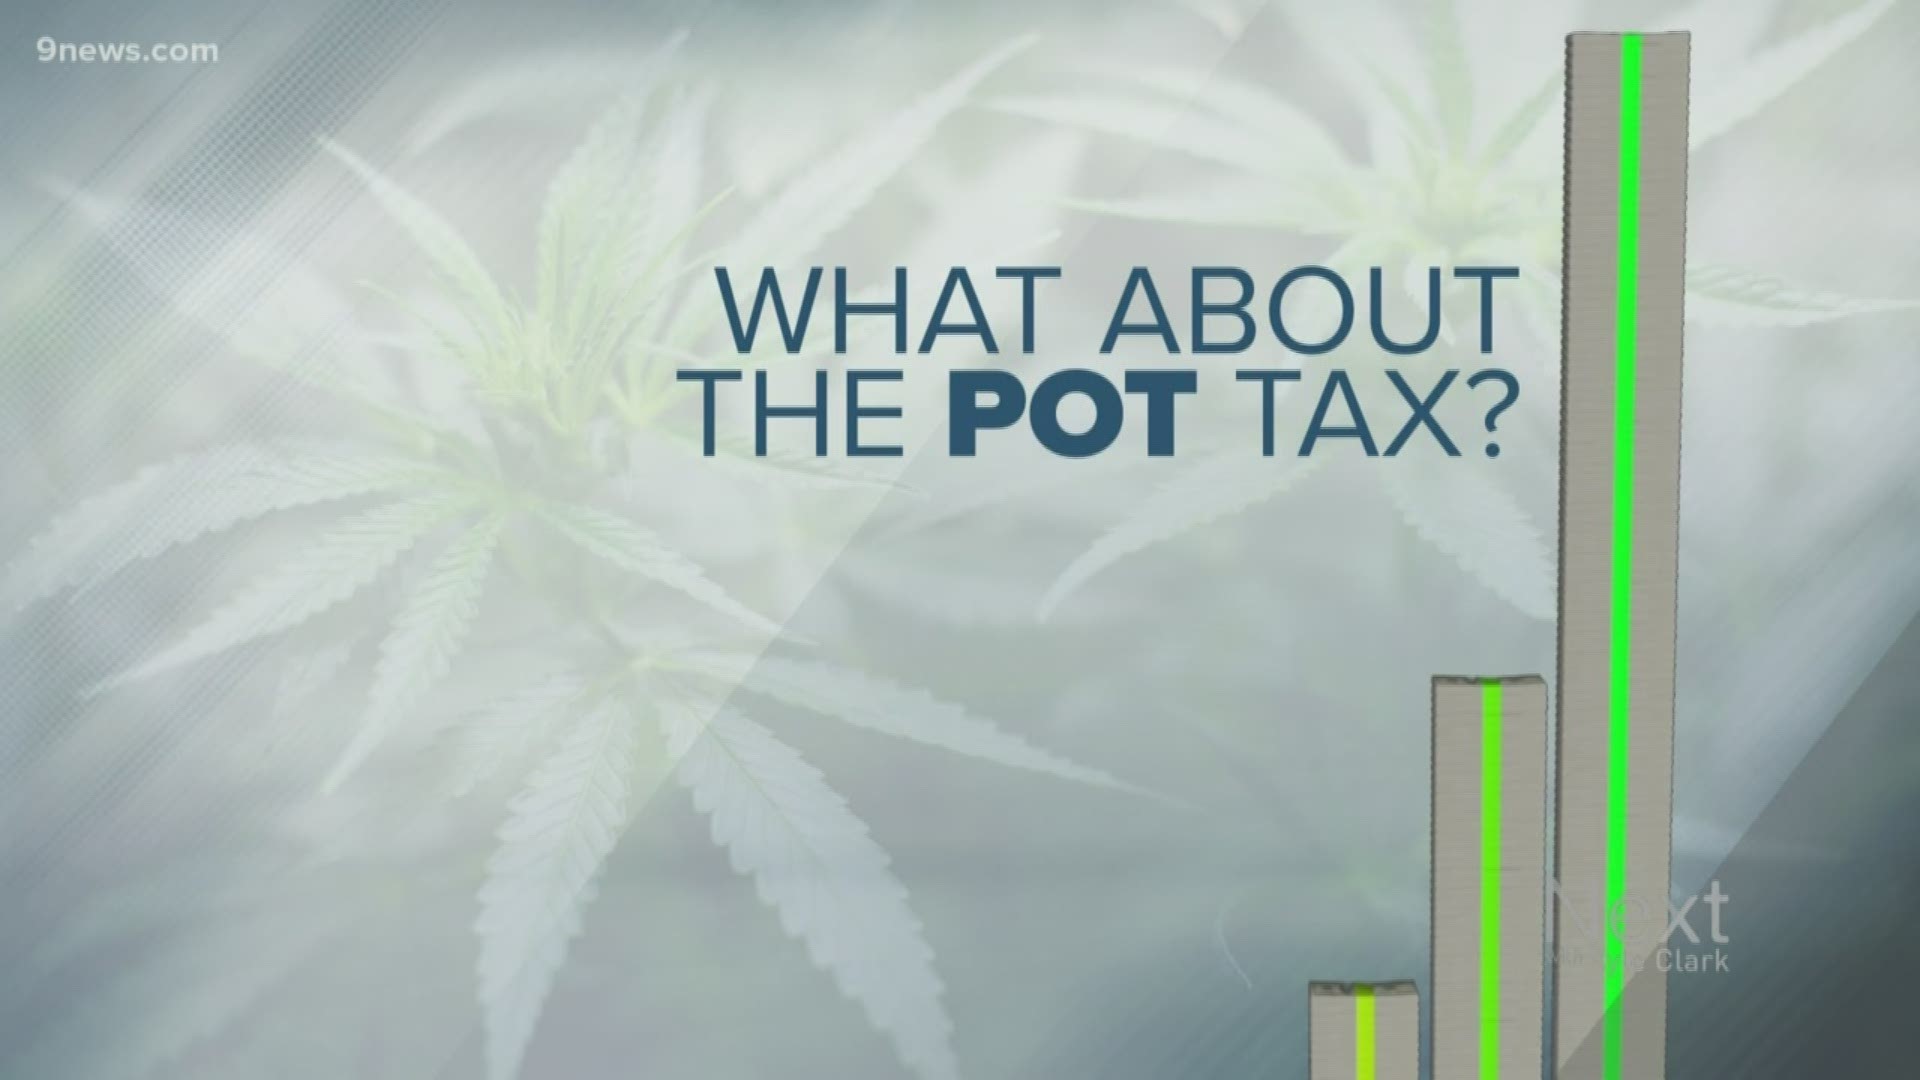 Democrats rejected a Republican proposal this week to repair Colorado's roads by diverting some sales tax revenue. So Next viewer John asked: What about the pot tax?